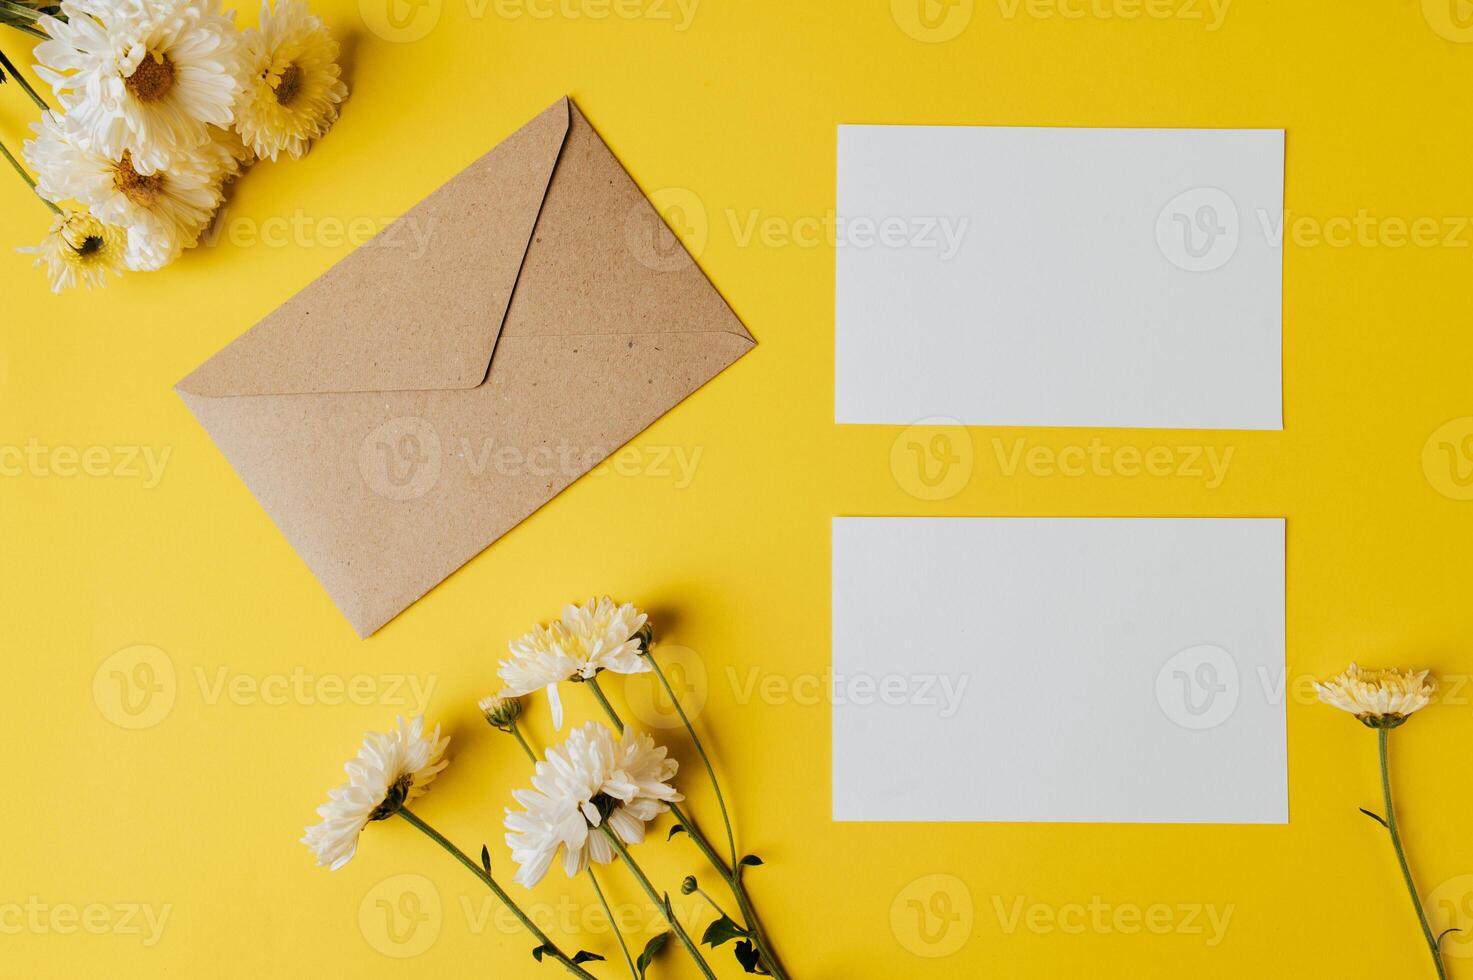 brown envelope and card on yellow background decorated with flowers photo